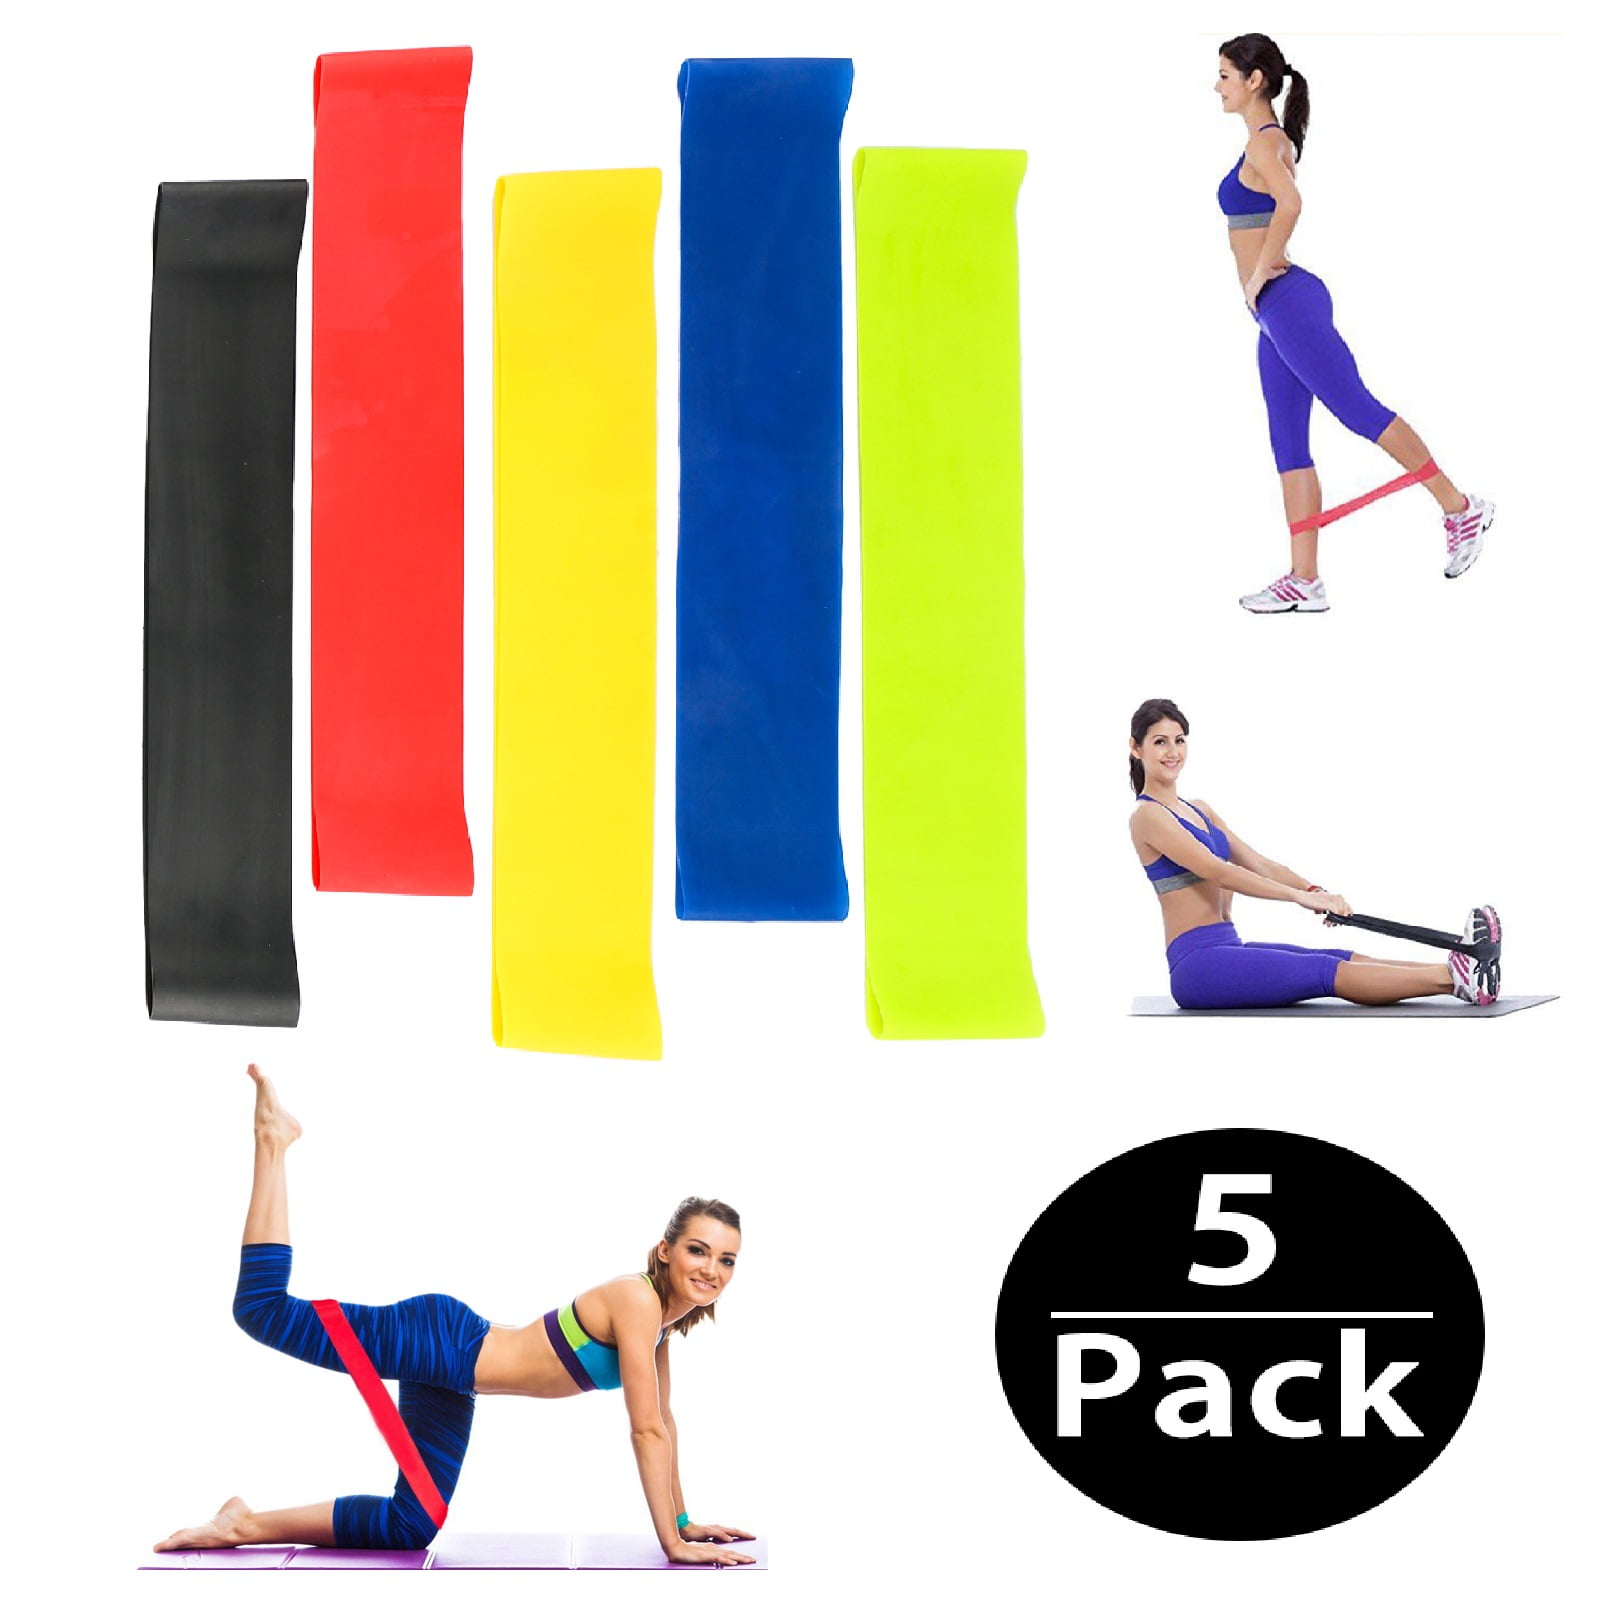 Fitness Weight Training Latex Resistance Band Gym Sports Exercise Loop Crossfit 